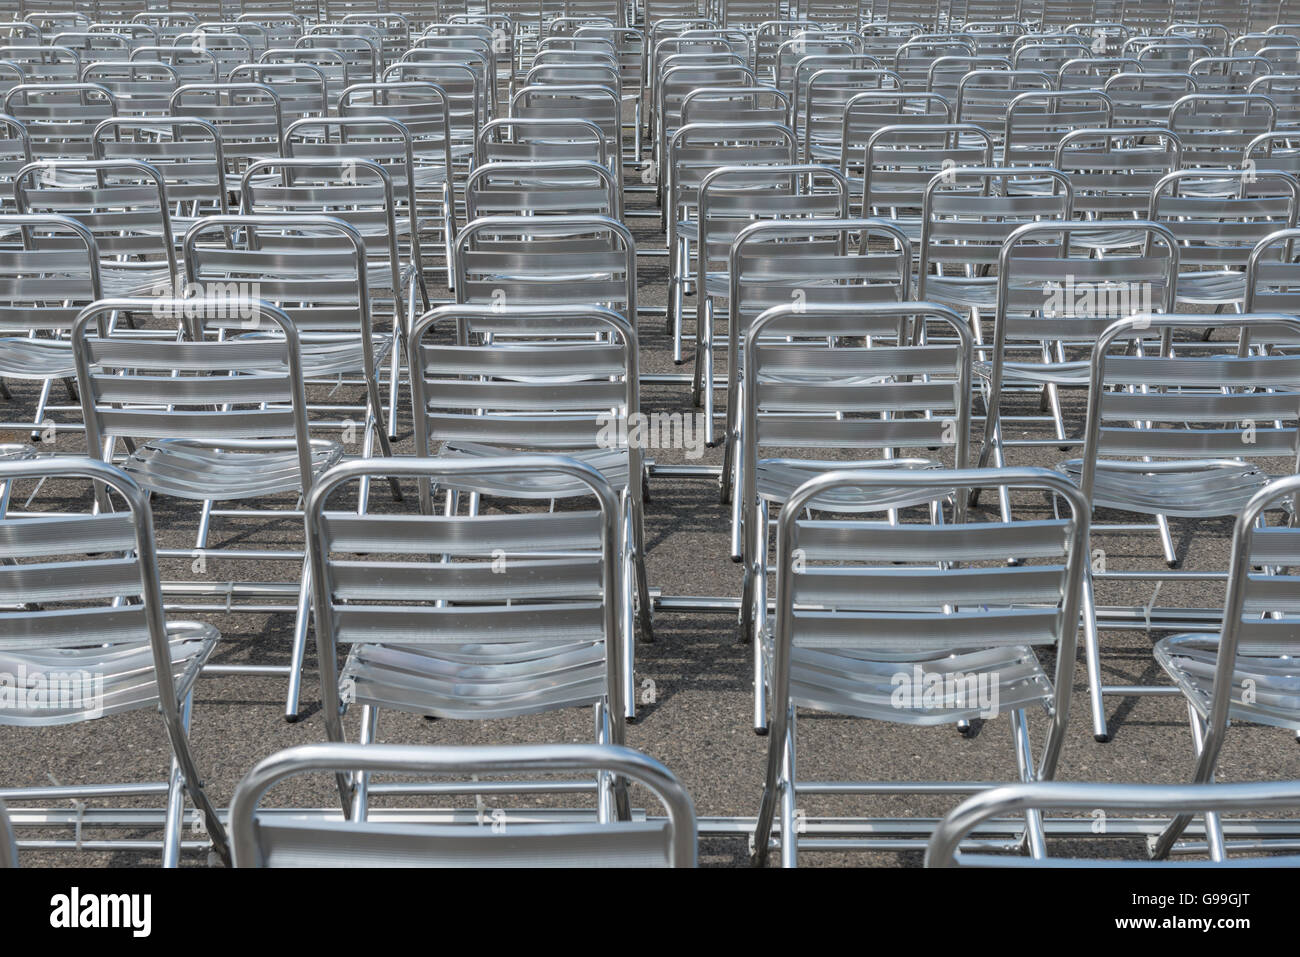 A Bunch of Silver Chairs Stock Photo